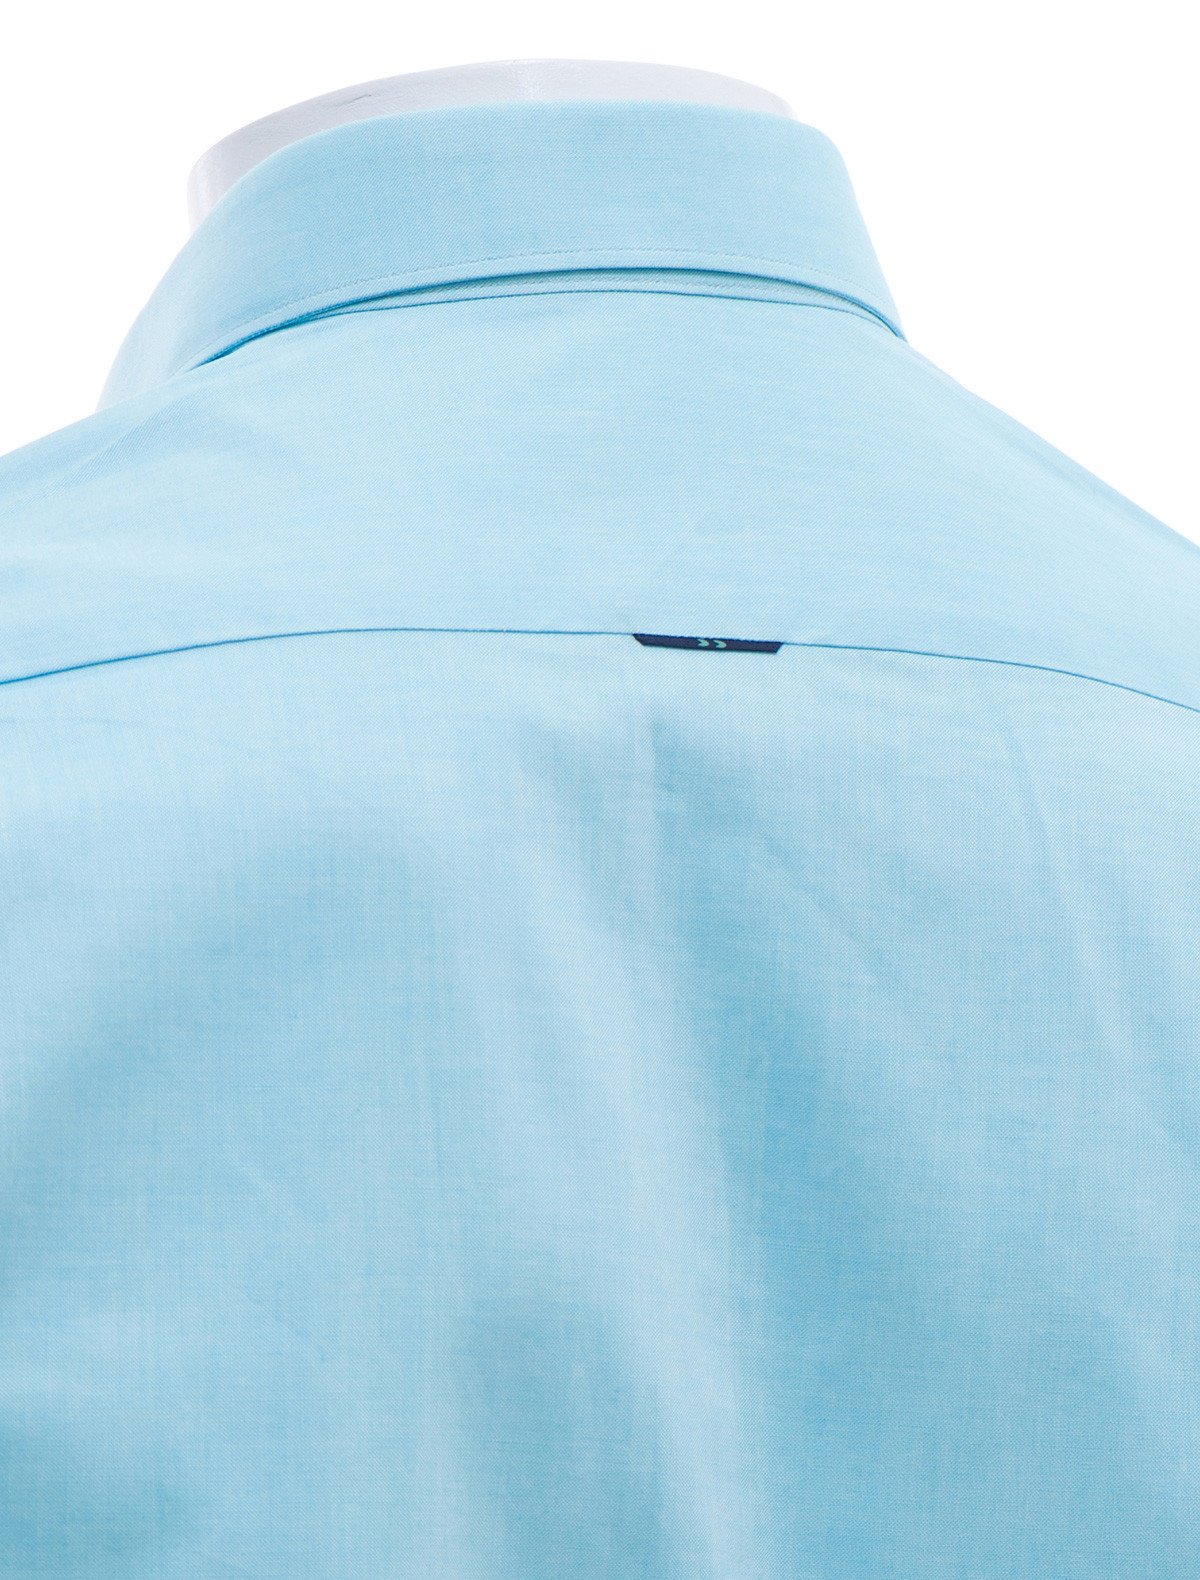 TURQUOISE BLUE SMART-CASUAL SHIRT